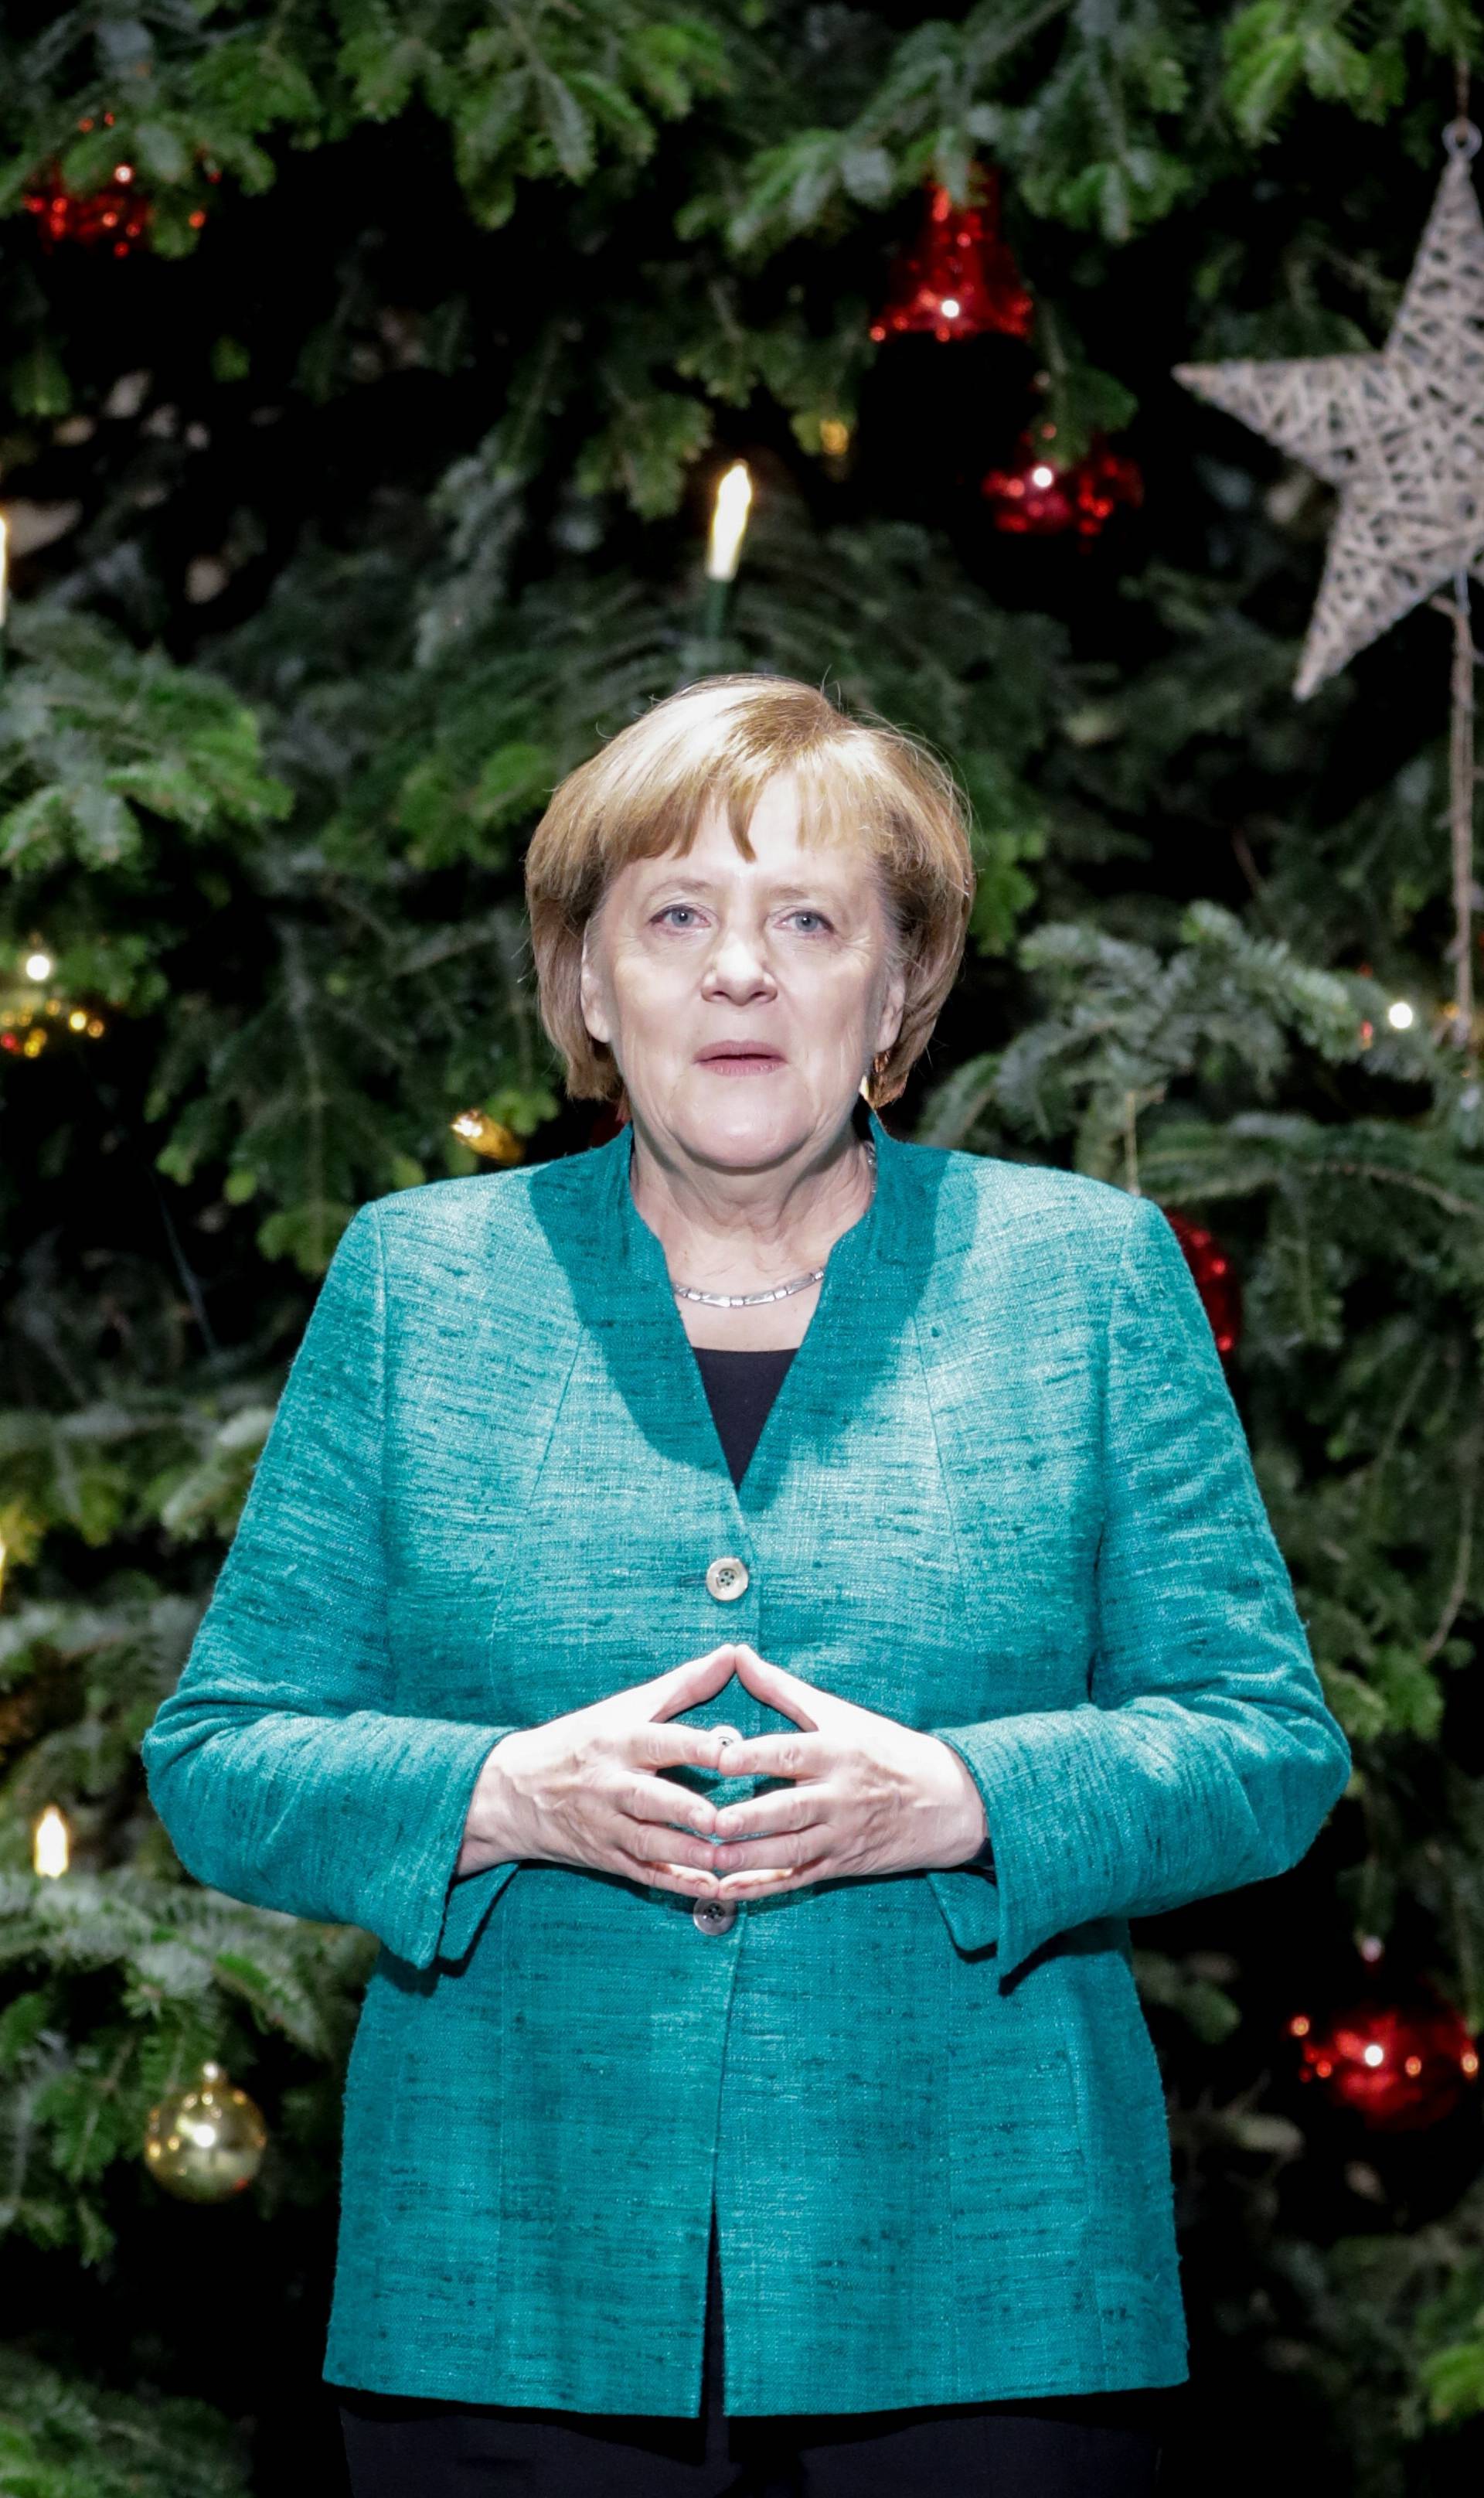 Christmas trees for the federal chancellery